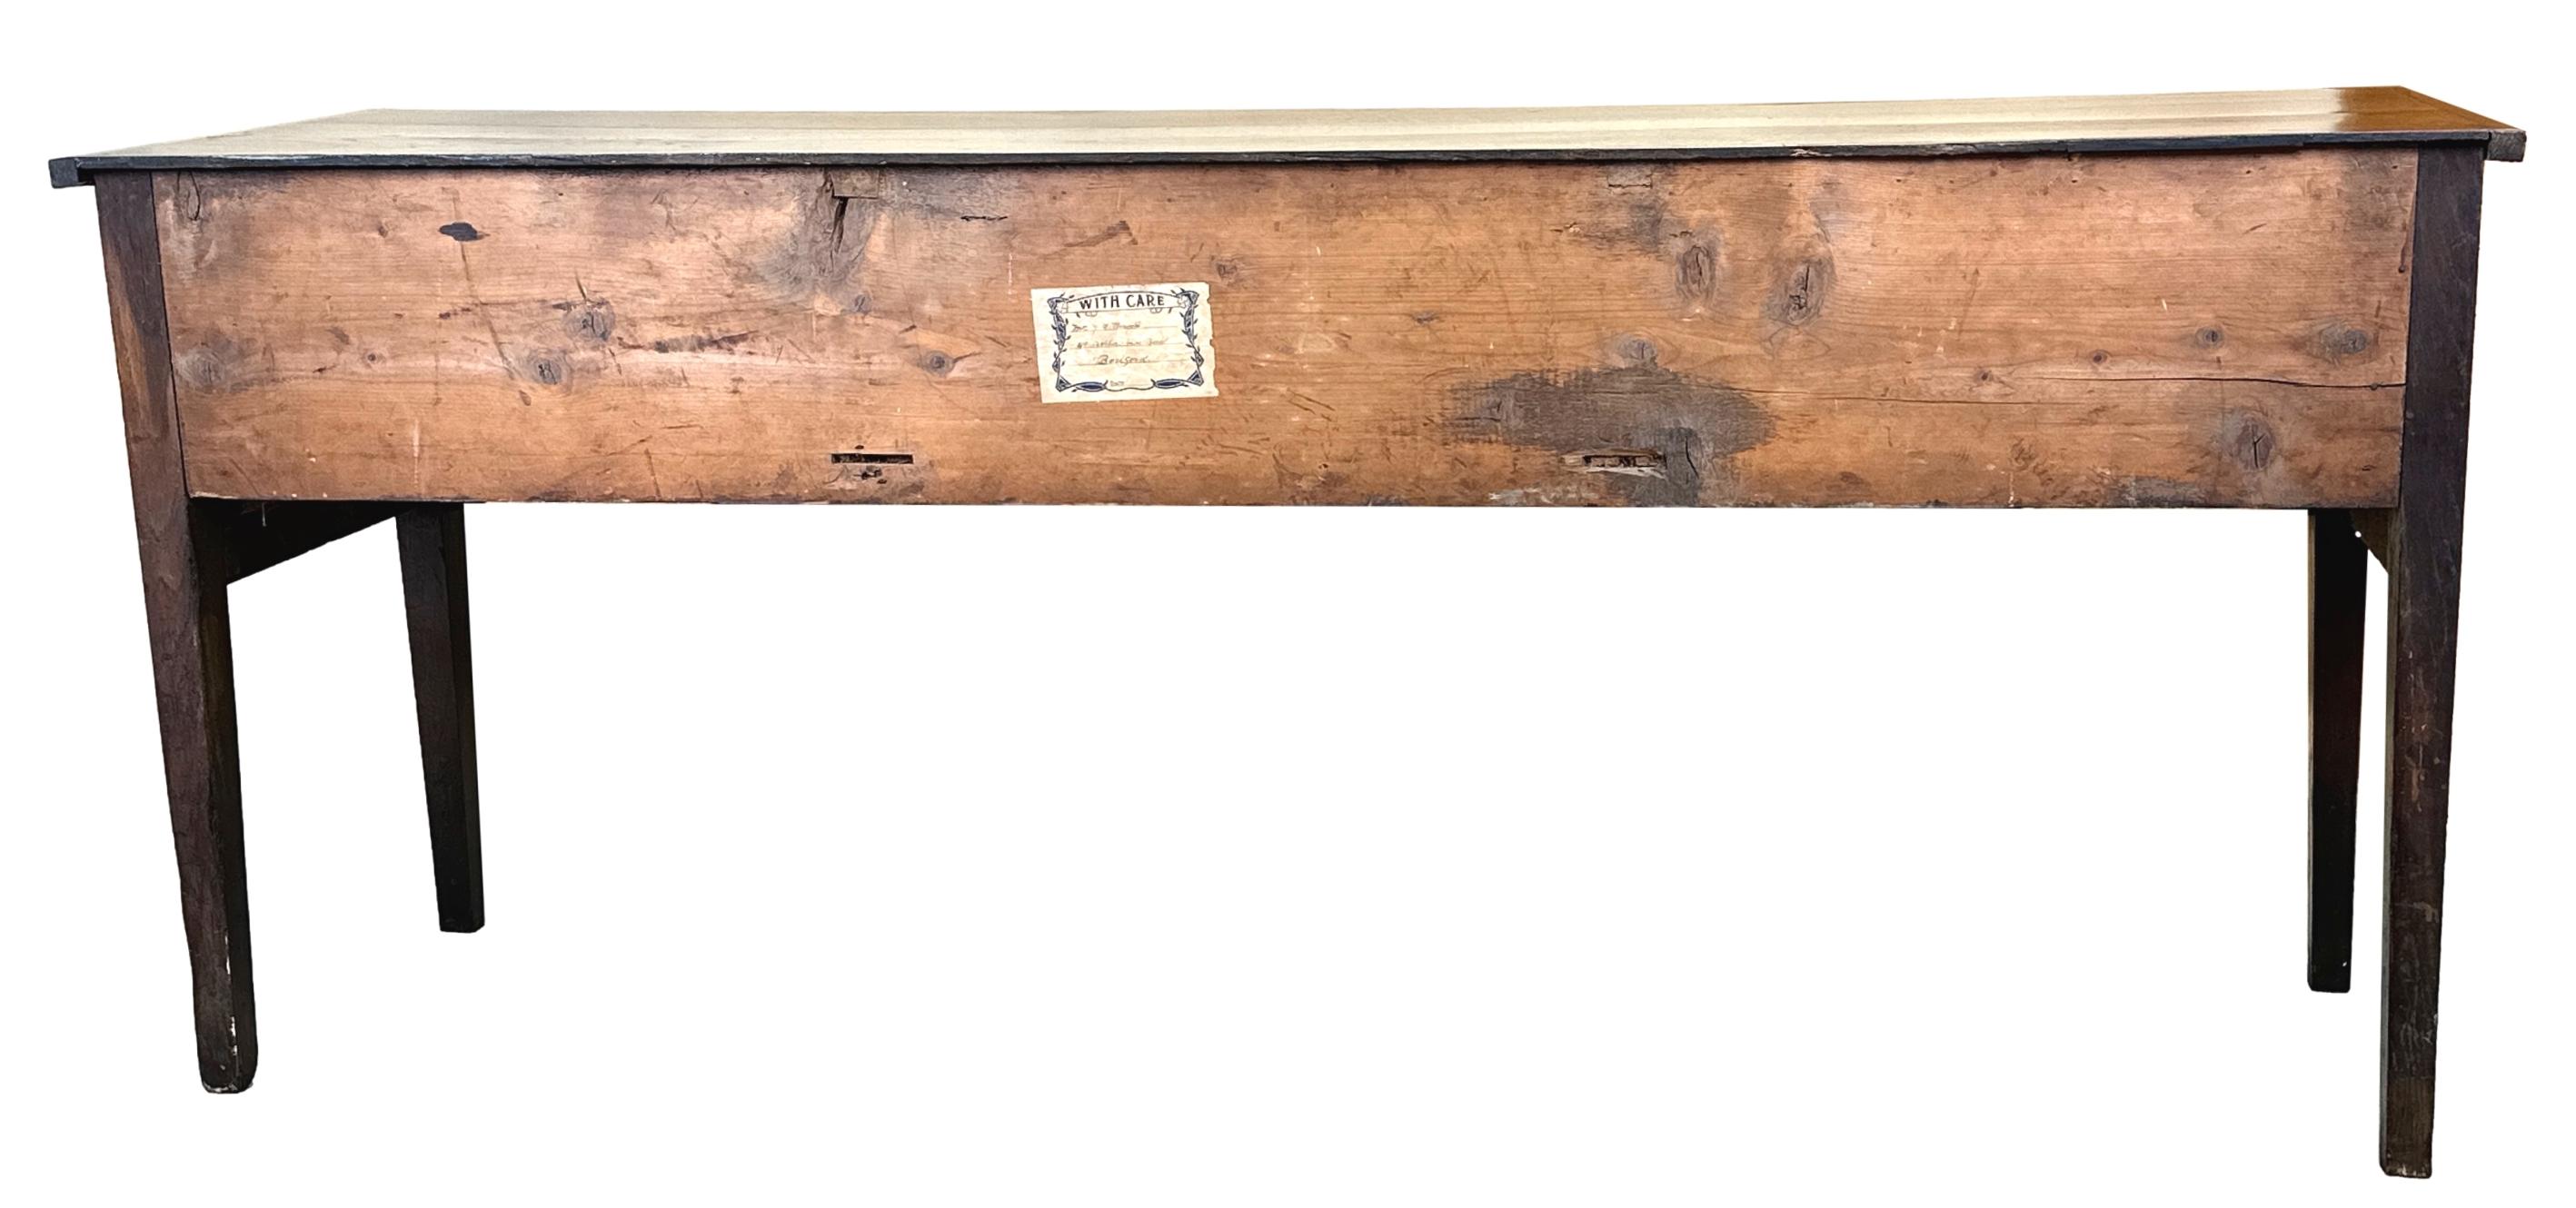 Georgian 18th Century Oak Dresser Base In Good Condition For Sale In Bedfordshire, GB